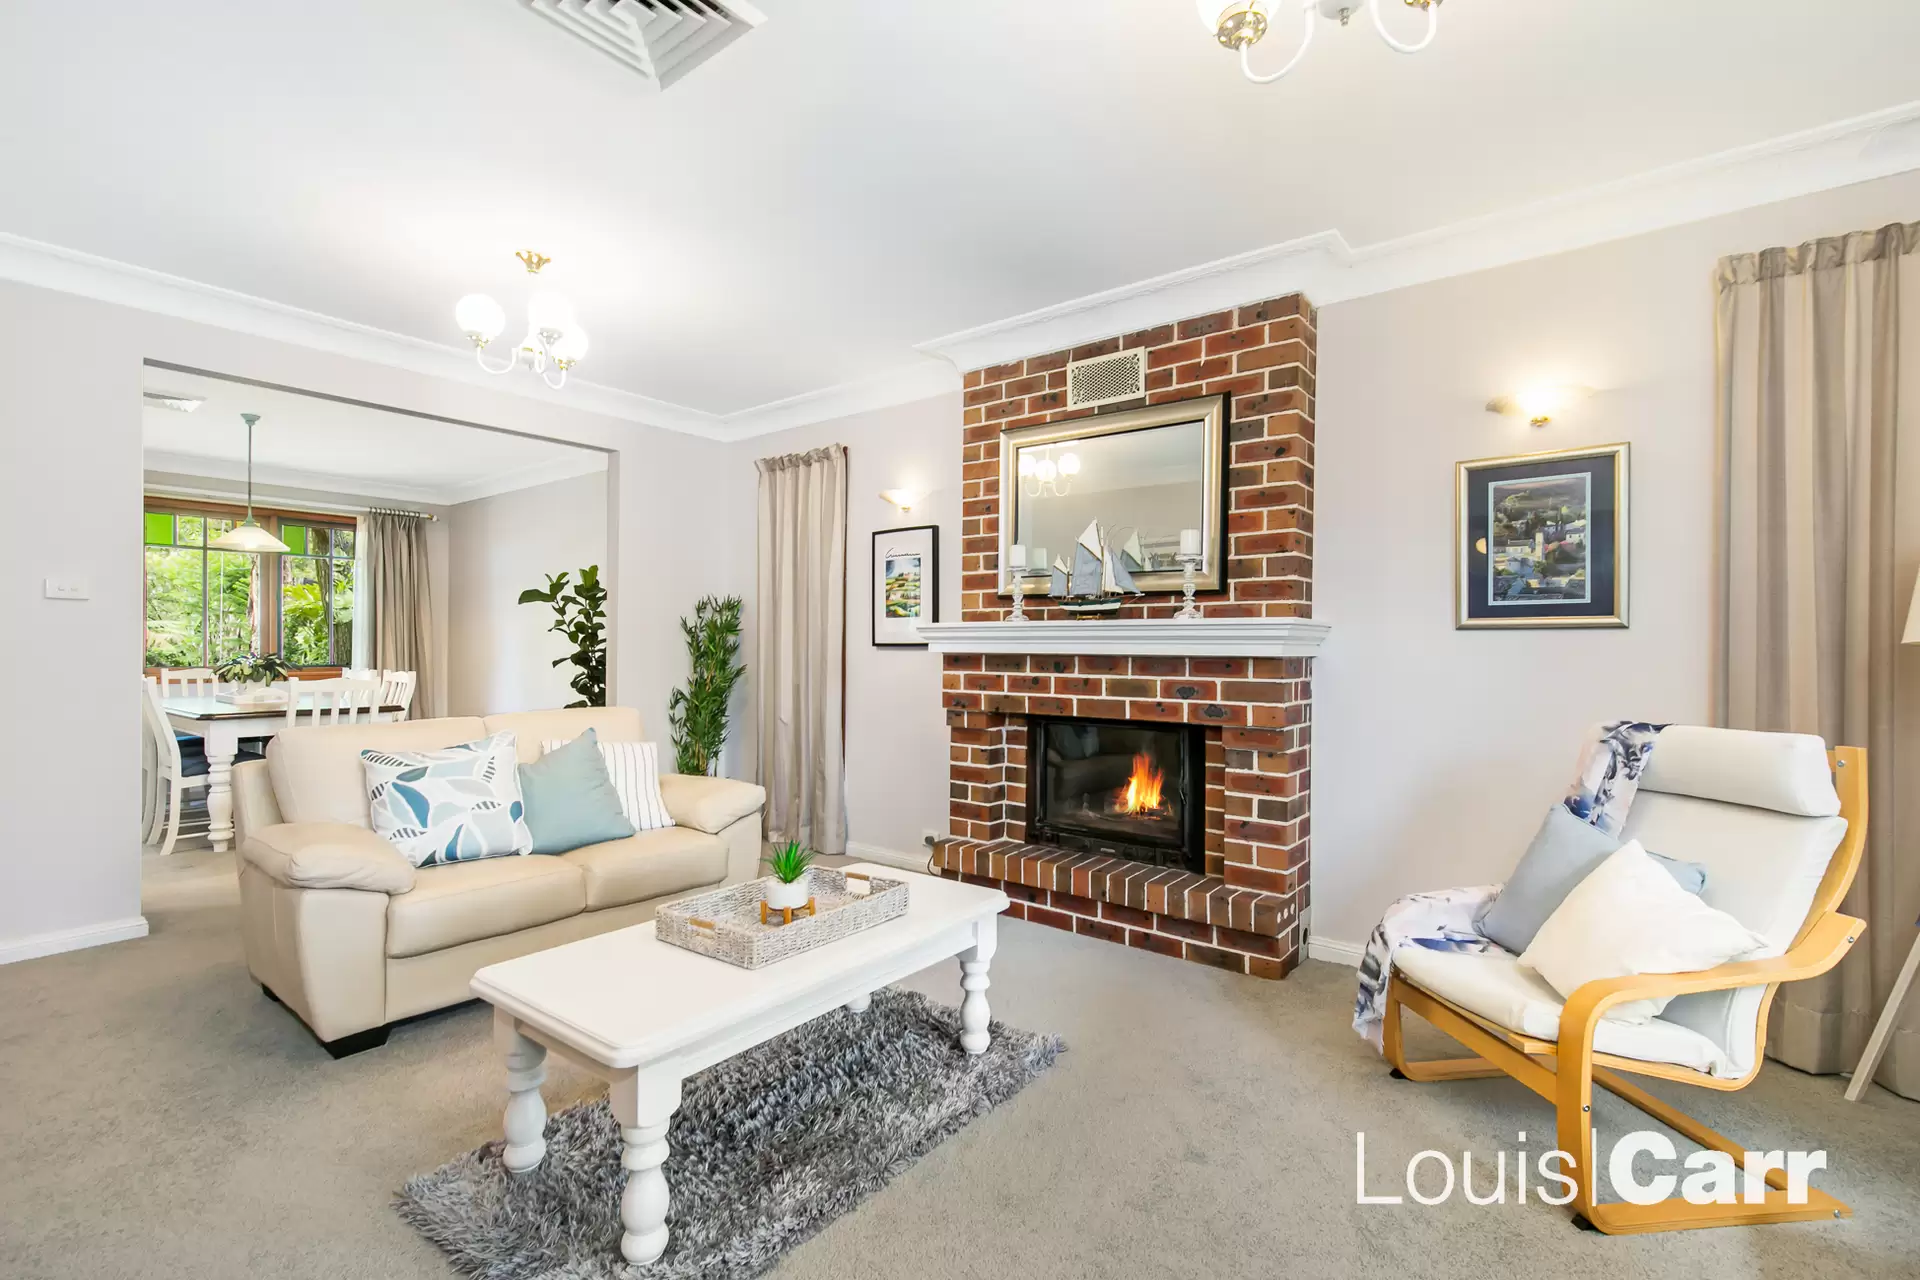 Photo #6: 15 Grangewood Place, West Pennant Hills - For Sale by Louis Carr Real Estate